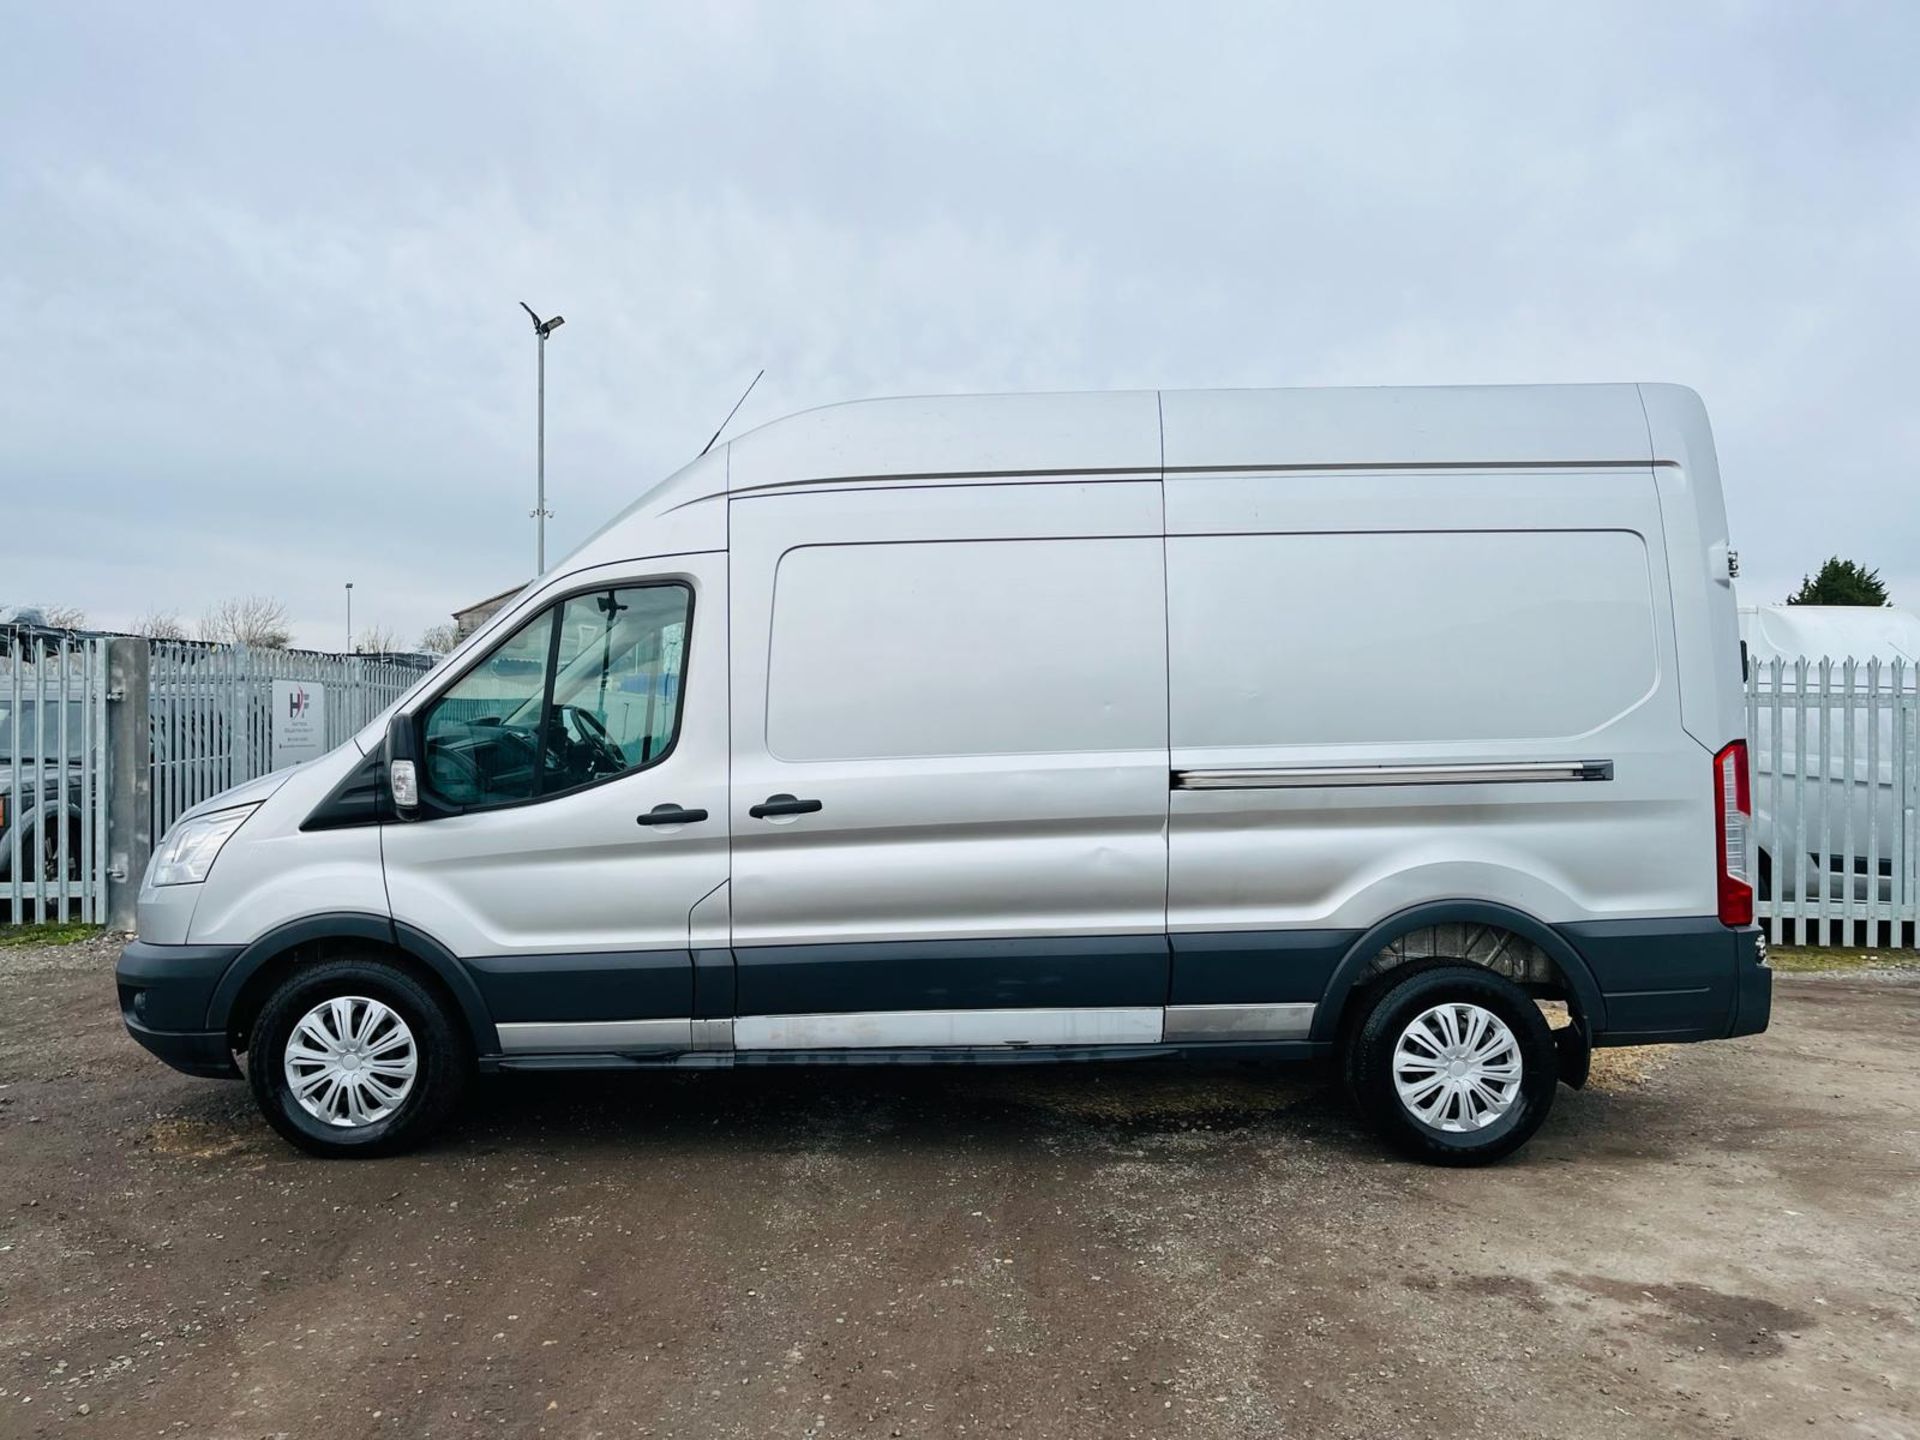 Ford Transit Trend 350 TDCI 125 2.2 L3 H3 2014 '64 Reg' - Parking sensors - Air Conditioning - Image 4 of 27